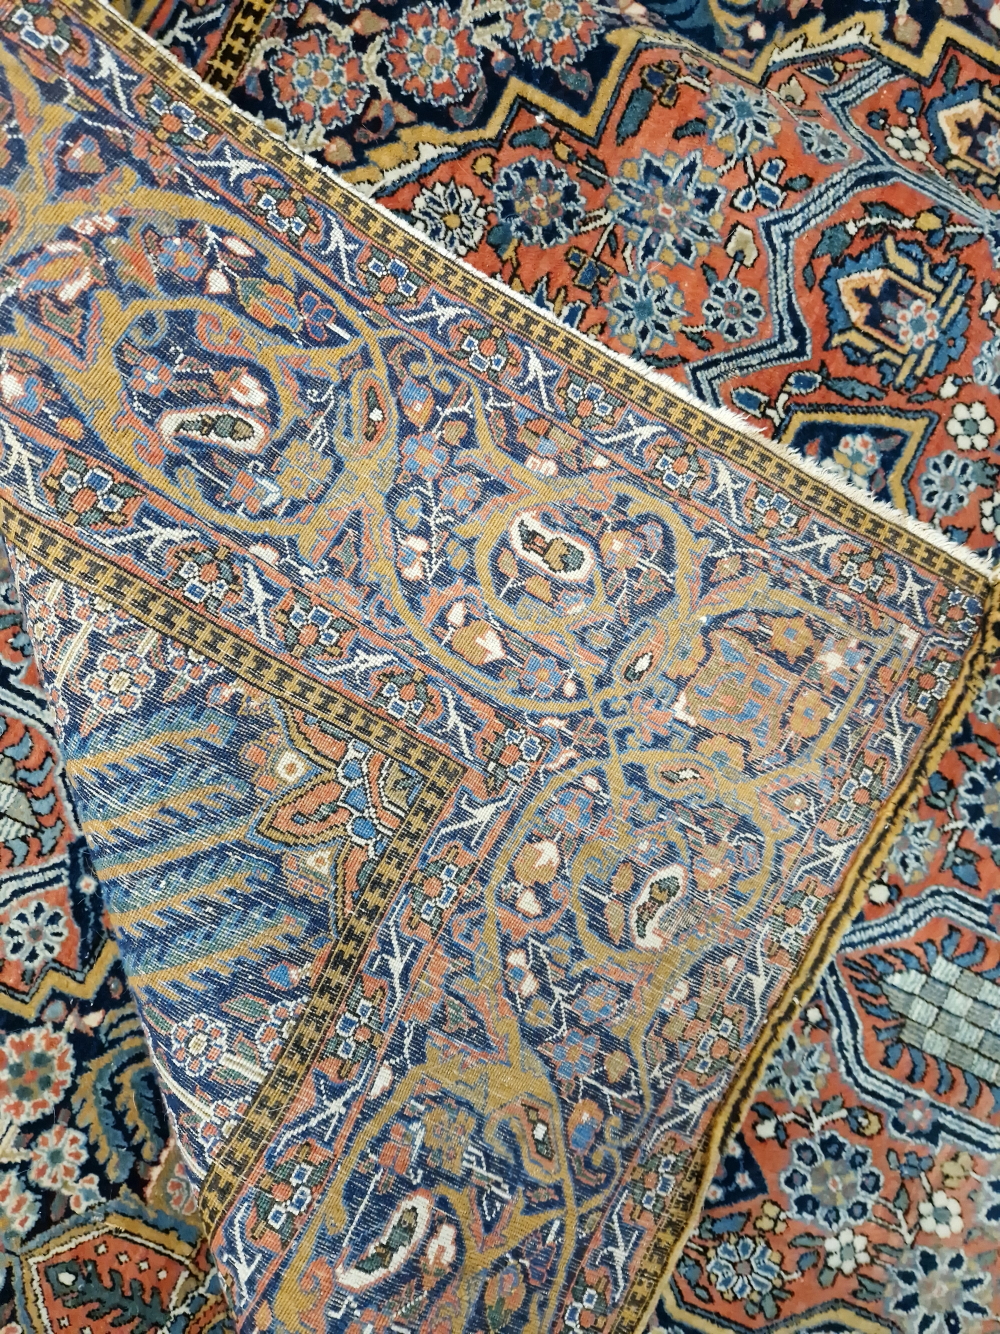 A PAIR OF ANTIQUE PERSIAN KASHAN RUGS. 298 x 132cms - Image 8 of 12